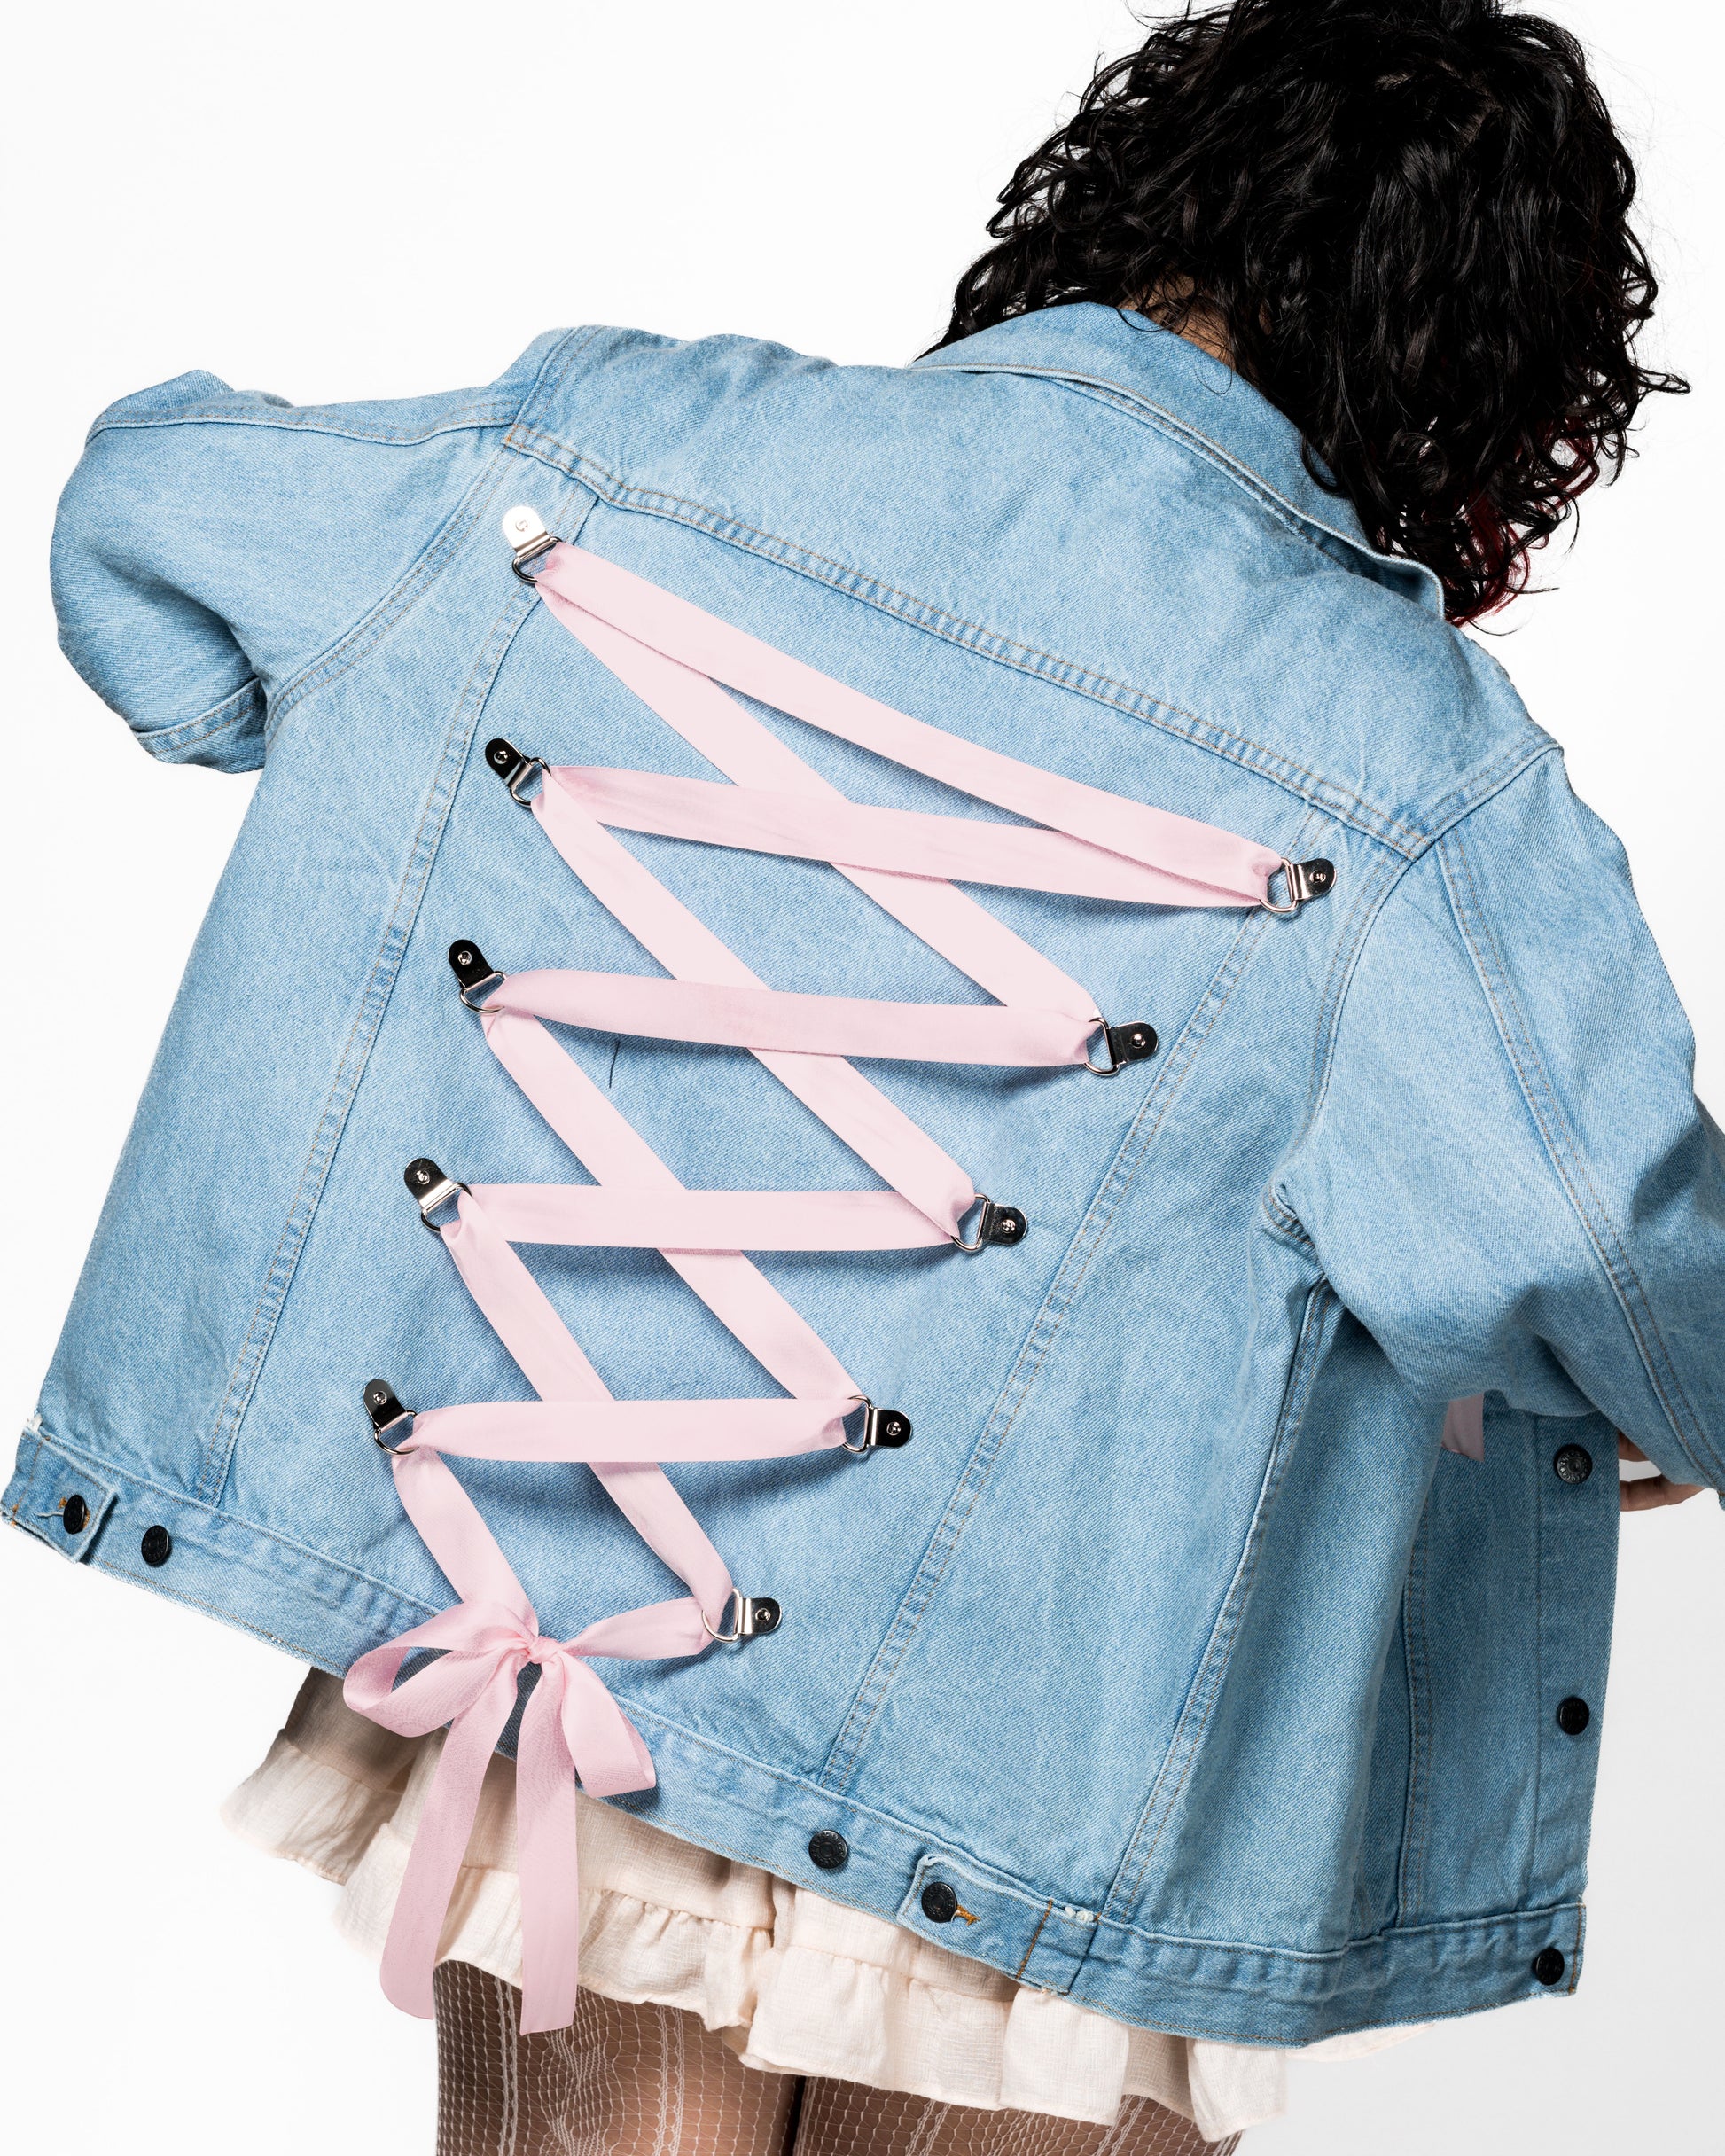 DENIM AND PATTERNED CORSET JACKET/TOP – CHAYKE